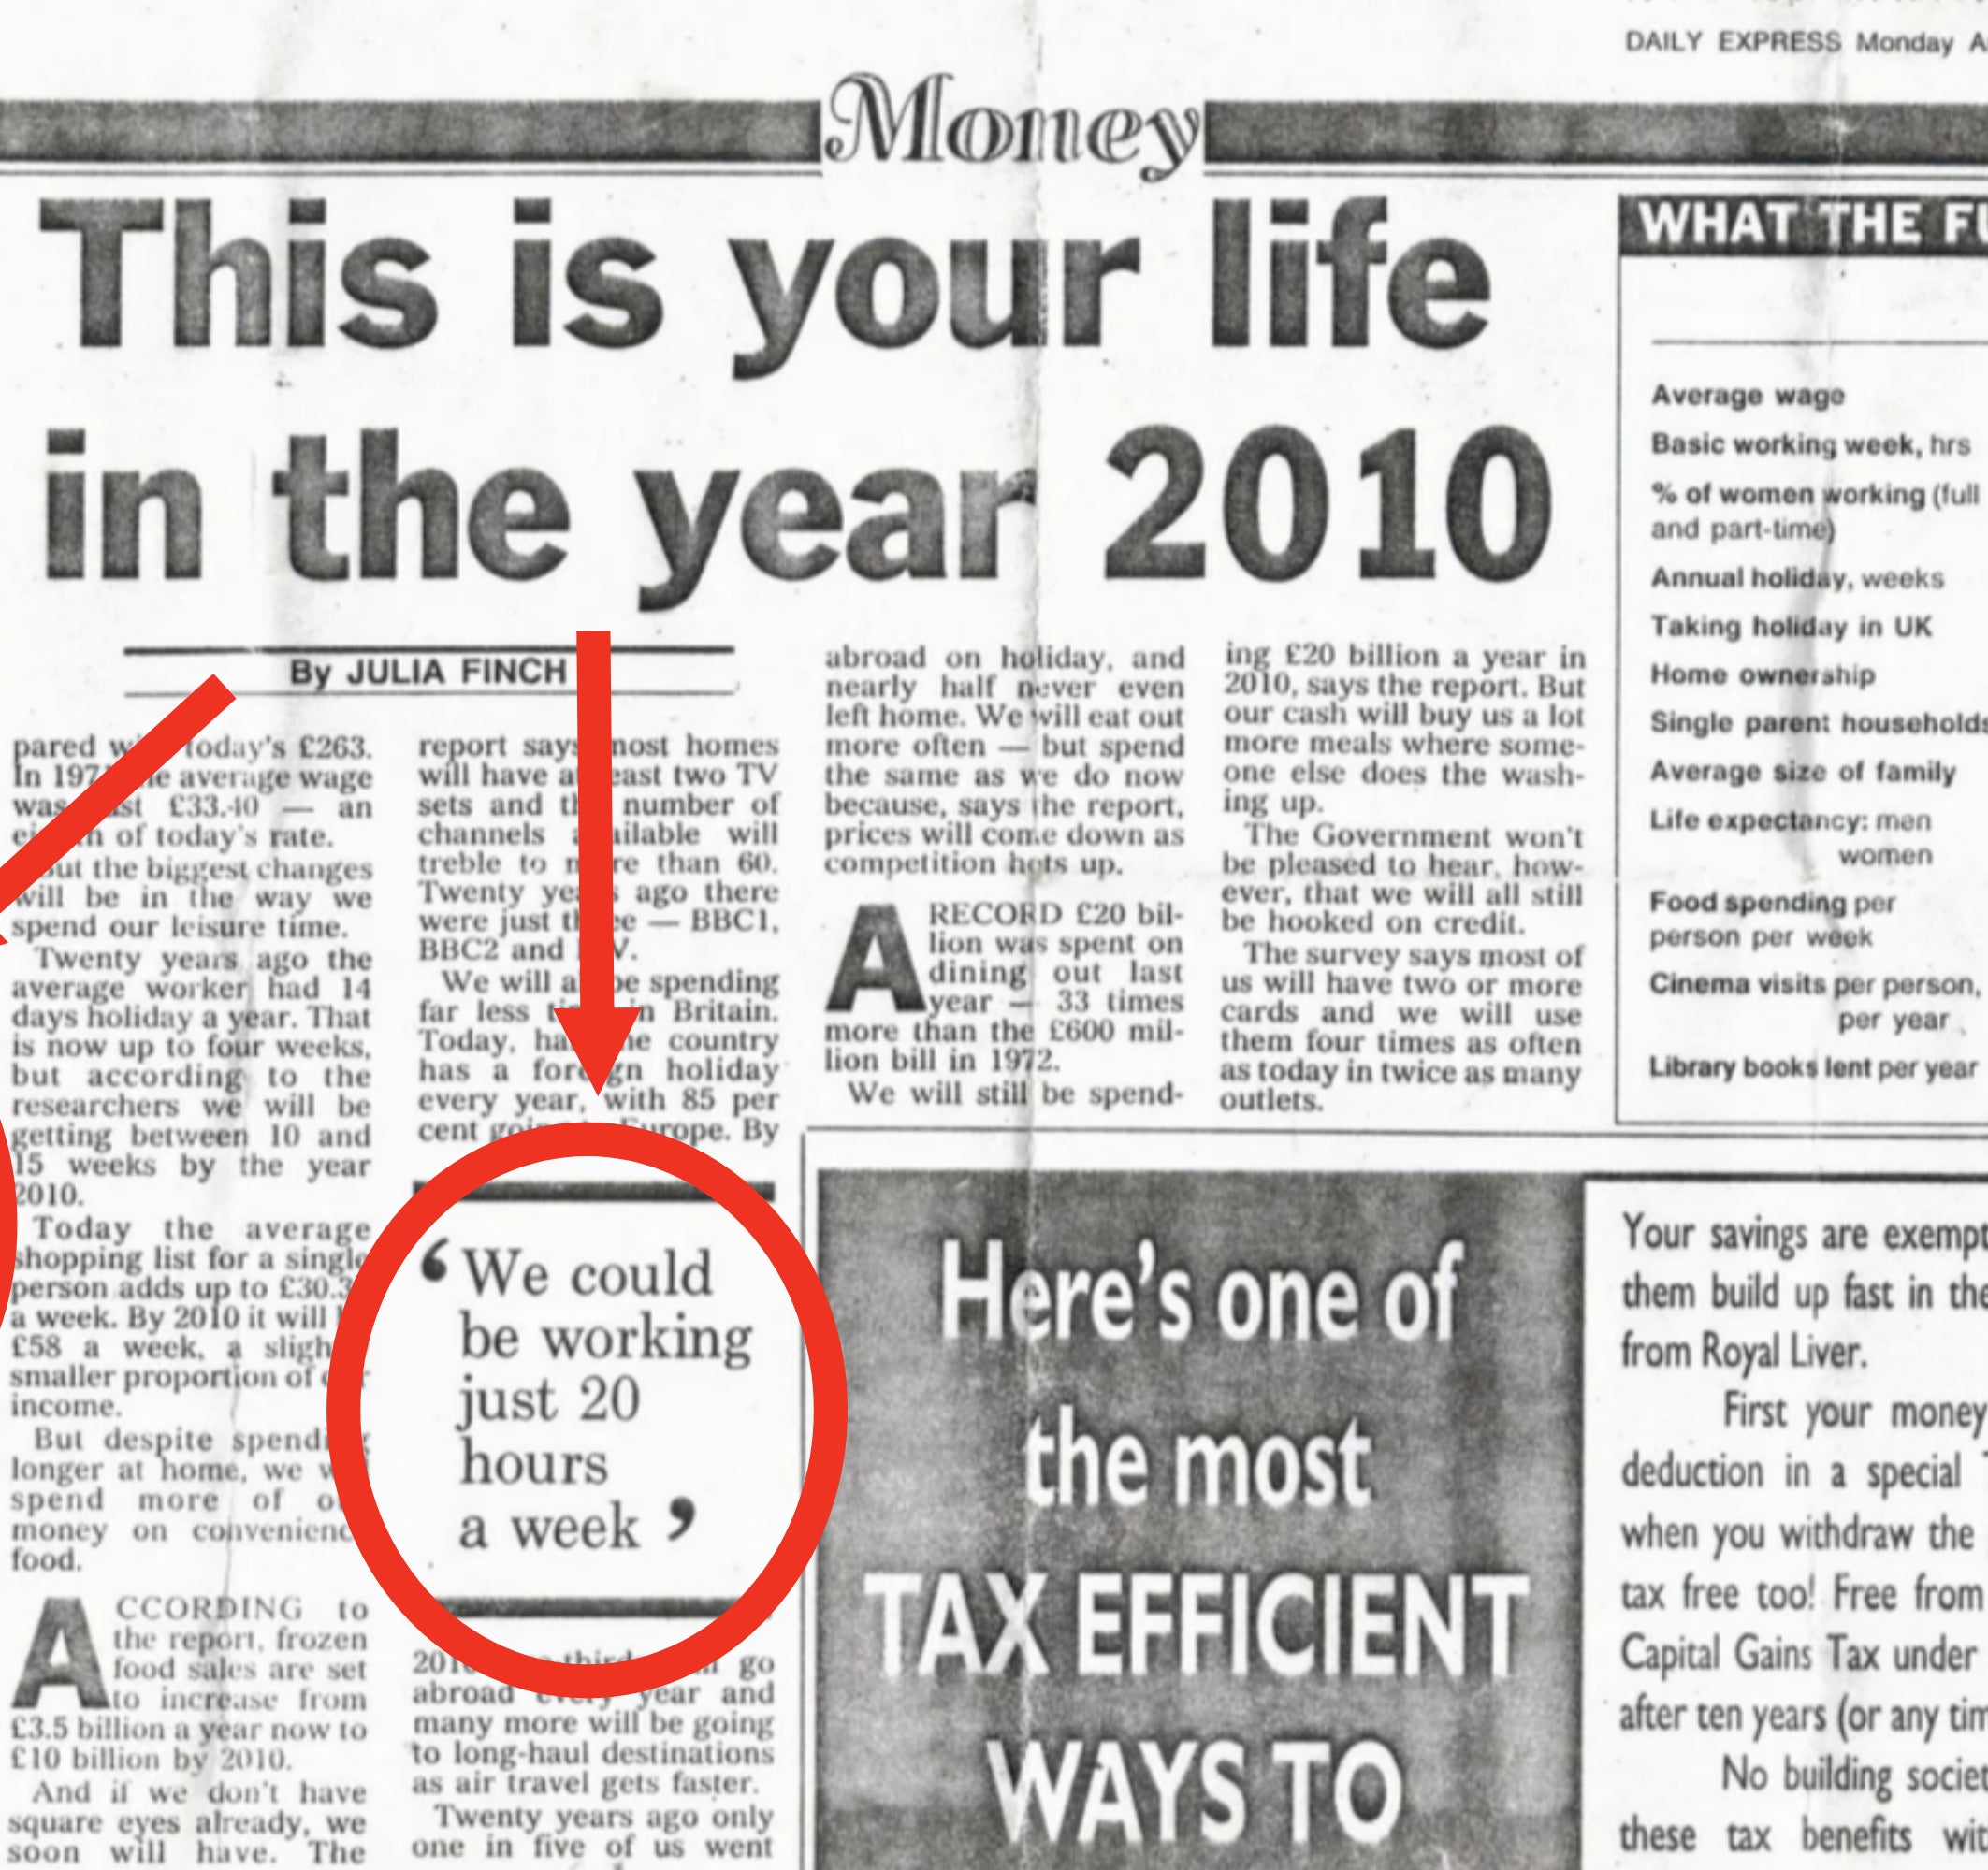 Newspaper clipping predicting life in the year 2010, detailing future finance trends, work hours, and technological advancements